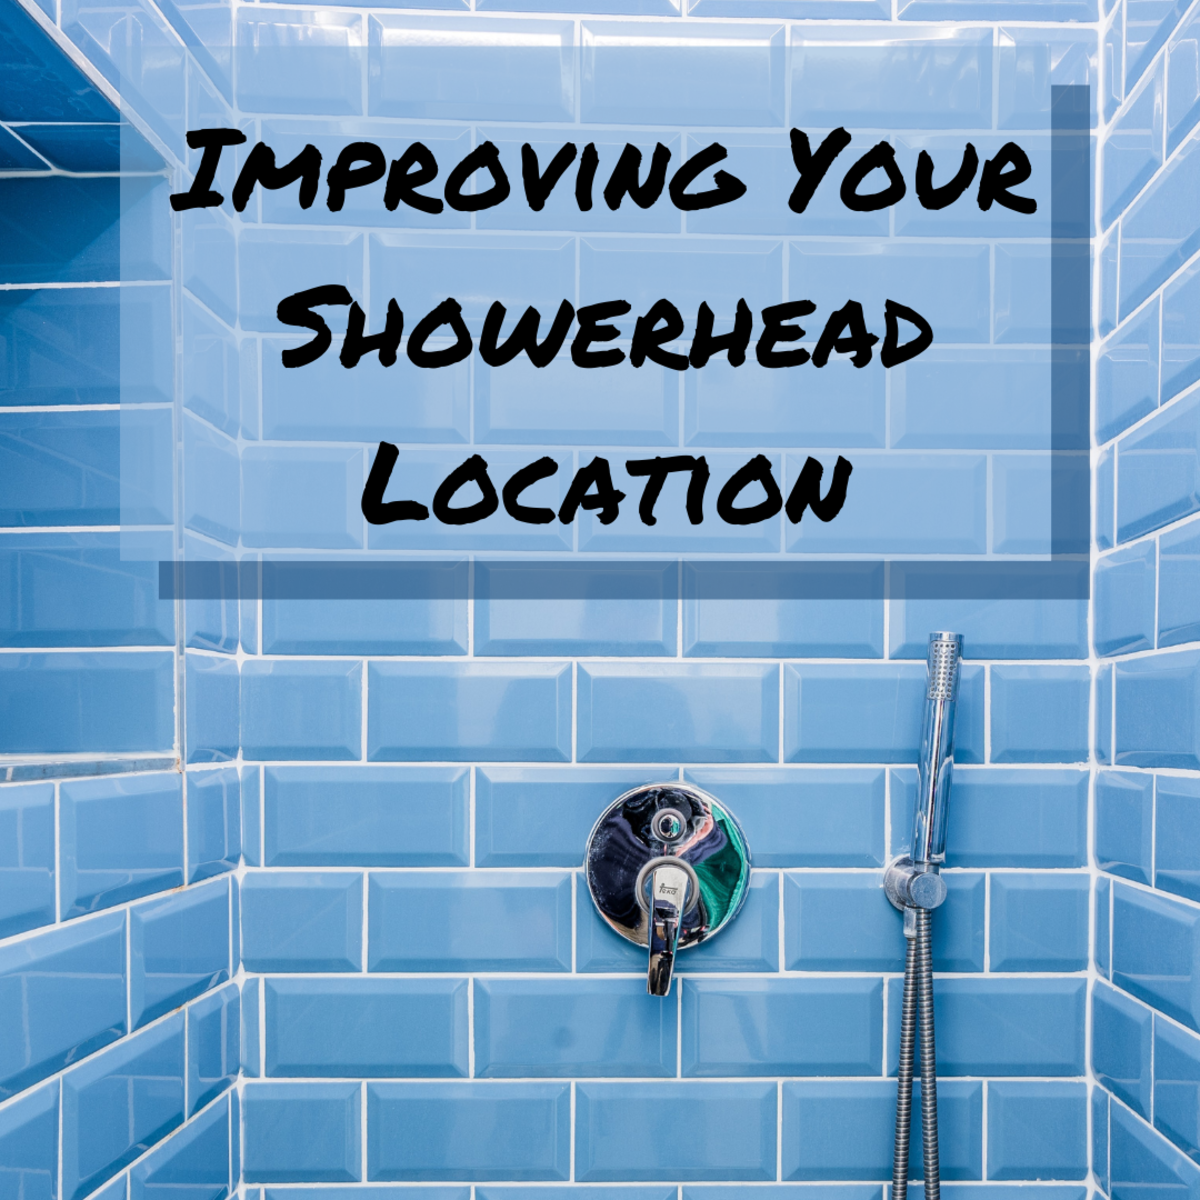 Learn how to fix your showerhead's location by raising or extending it.